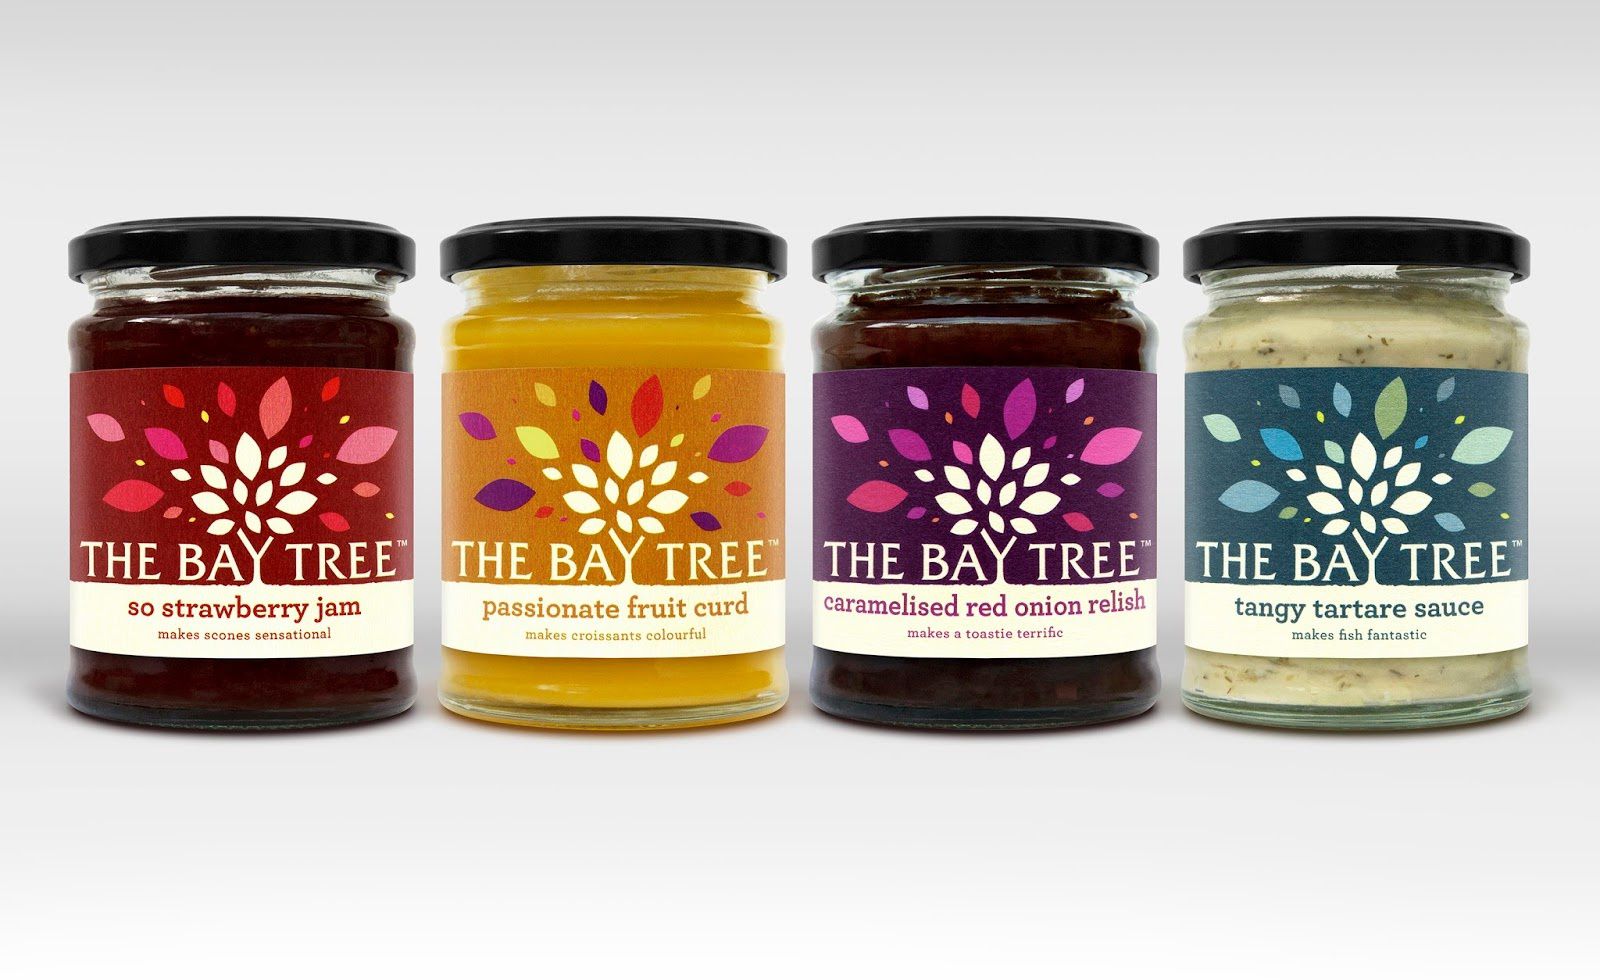  The Bay Tree - Bay Tree Foods Company (confitures, sauces et condiments) | Design : Afterhours, Royaume-Uni (août 2016)